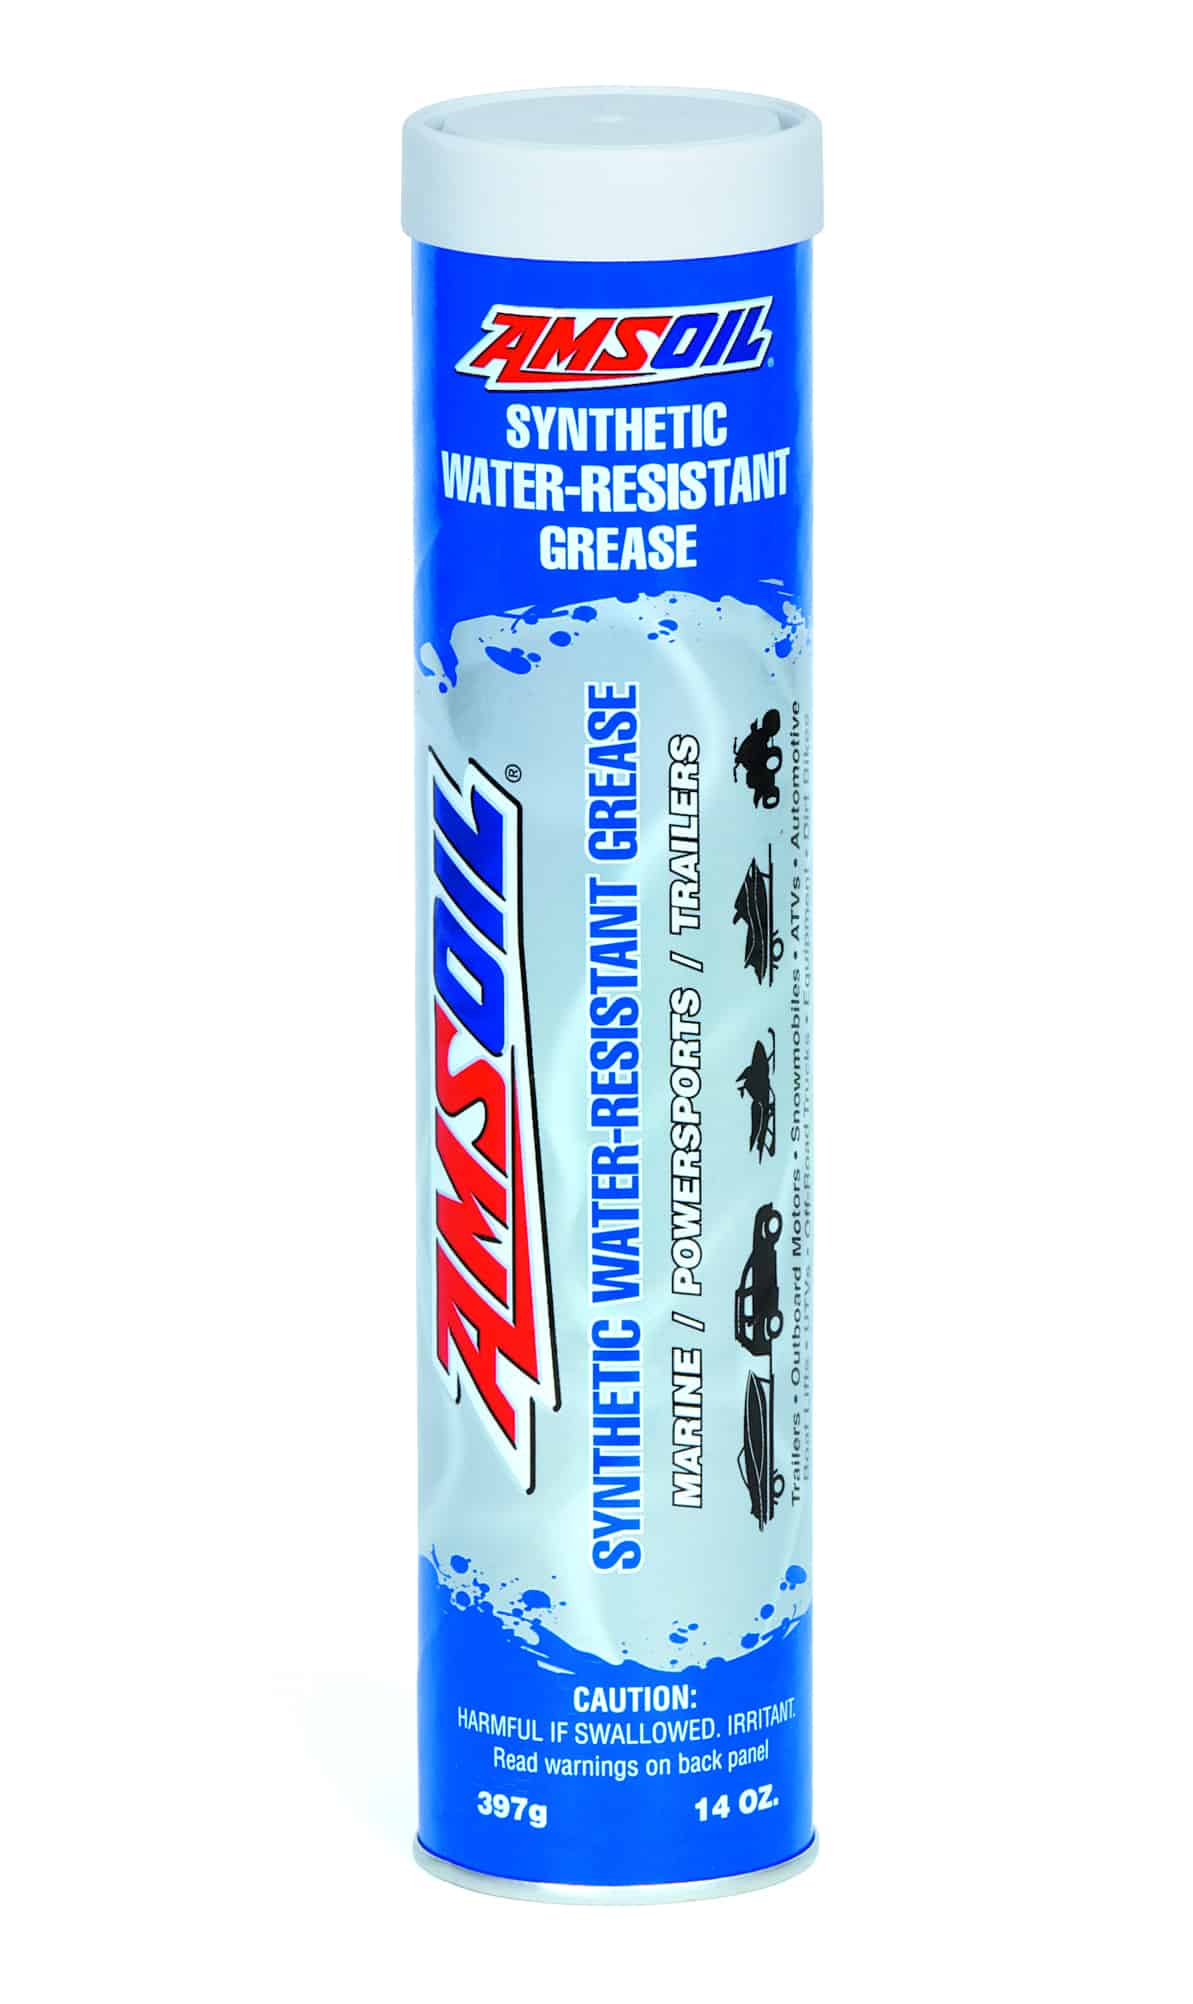 A cartridge of AMSOIL Synthetic Water-Resistant Grease, formulated to provide exceptional film strength, shear resistance, adhesion properties and mechanical stability.